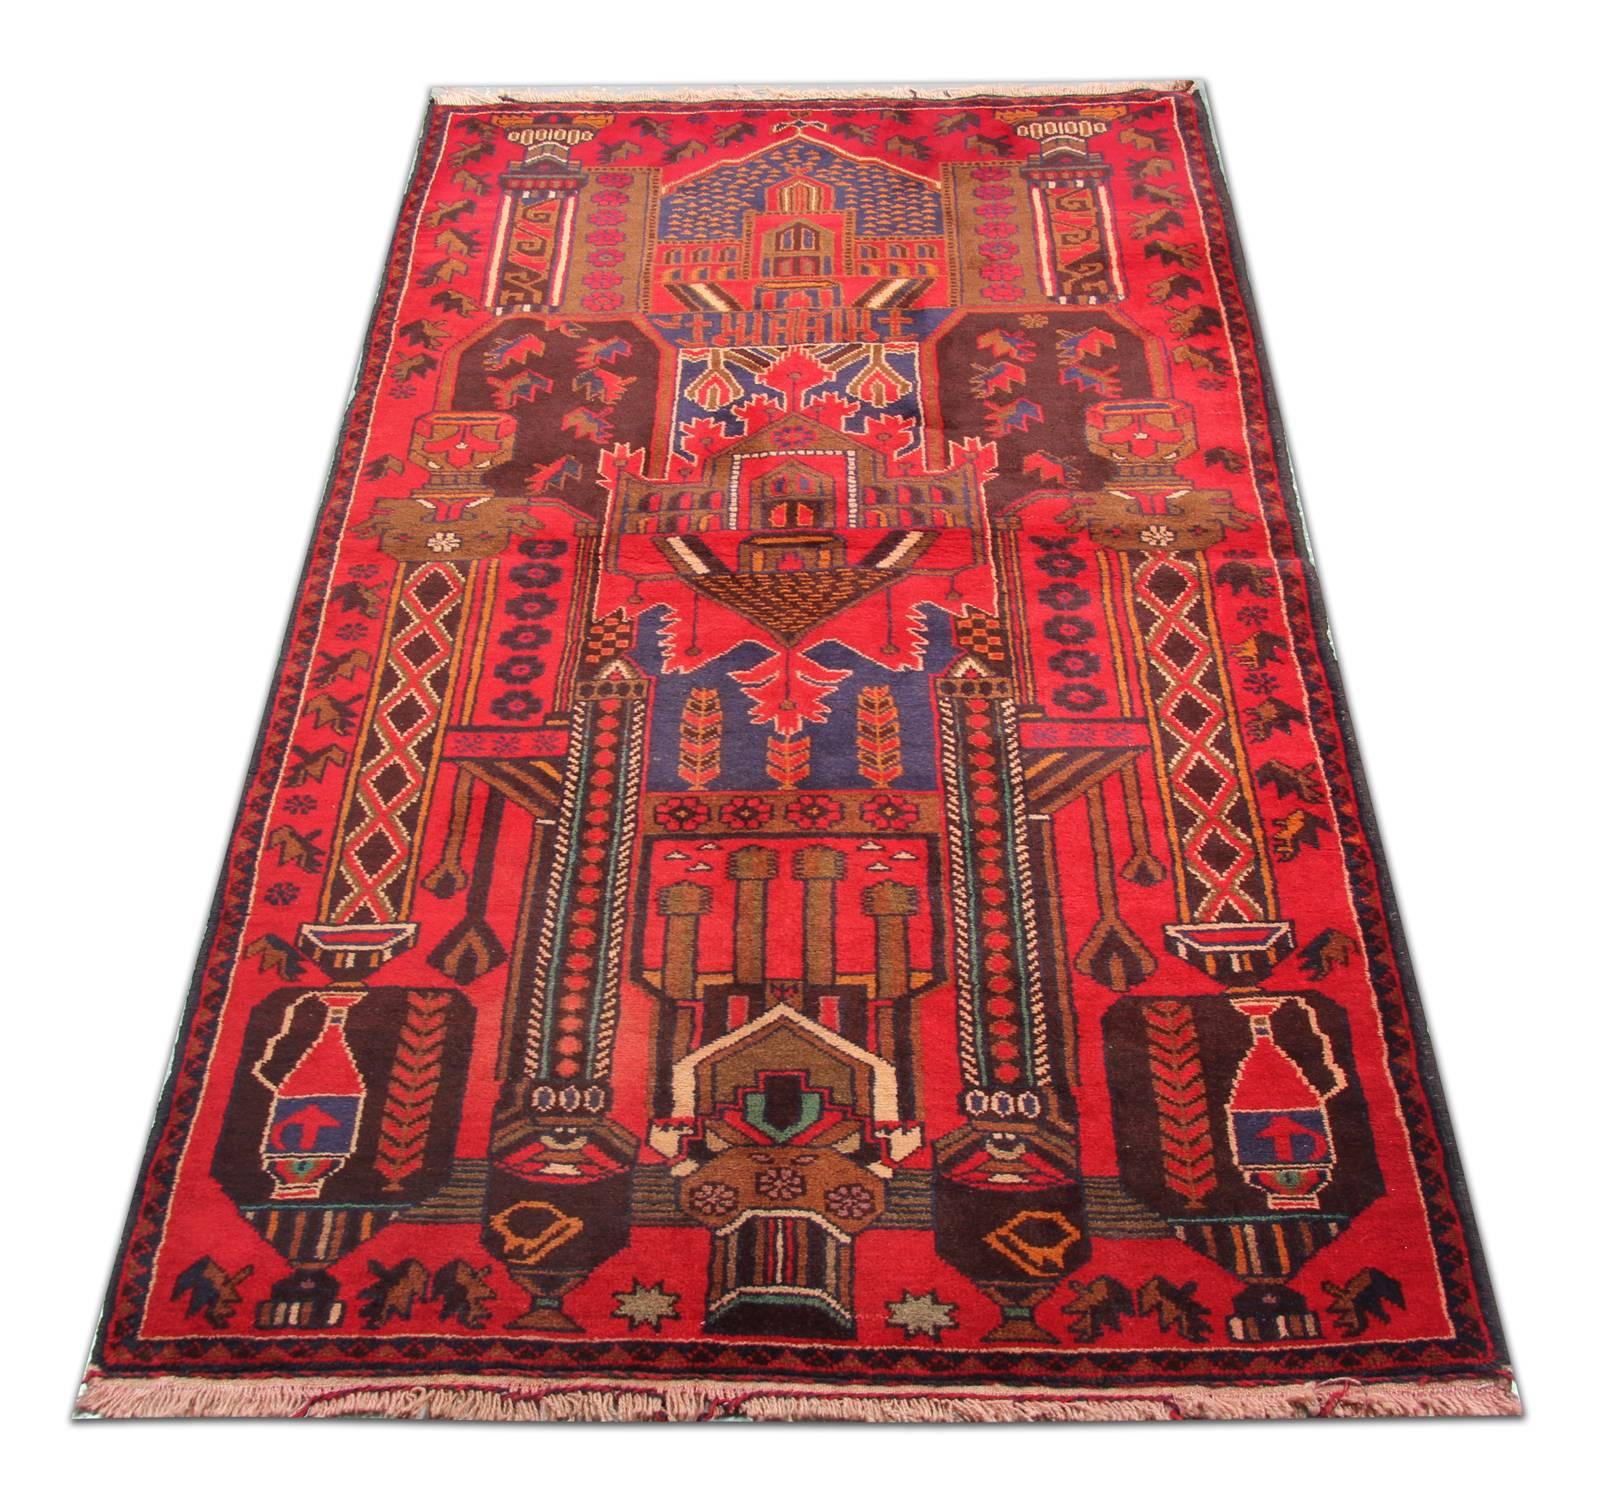 This beautiful wool rug features a top to bottom design with an array of tribal medallions and motifs. Blue and red are the main colours woven in this rug, contrasting beautifully to create this centrepiece rug. This rug would make a perfect